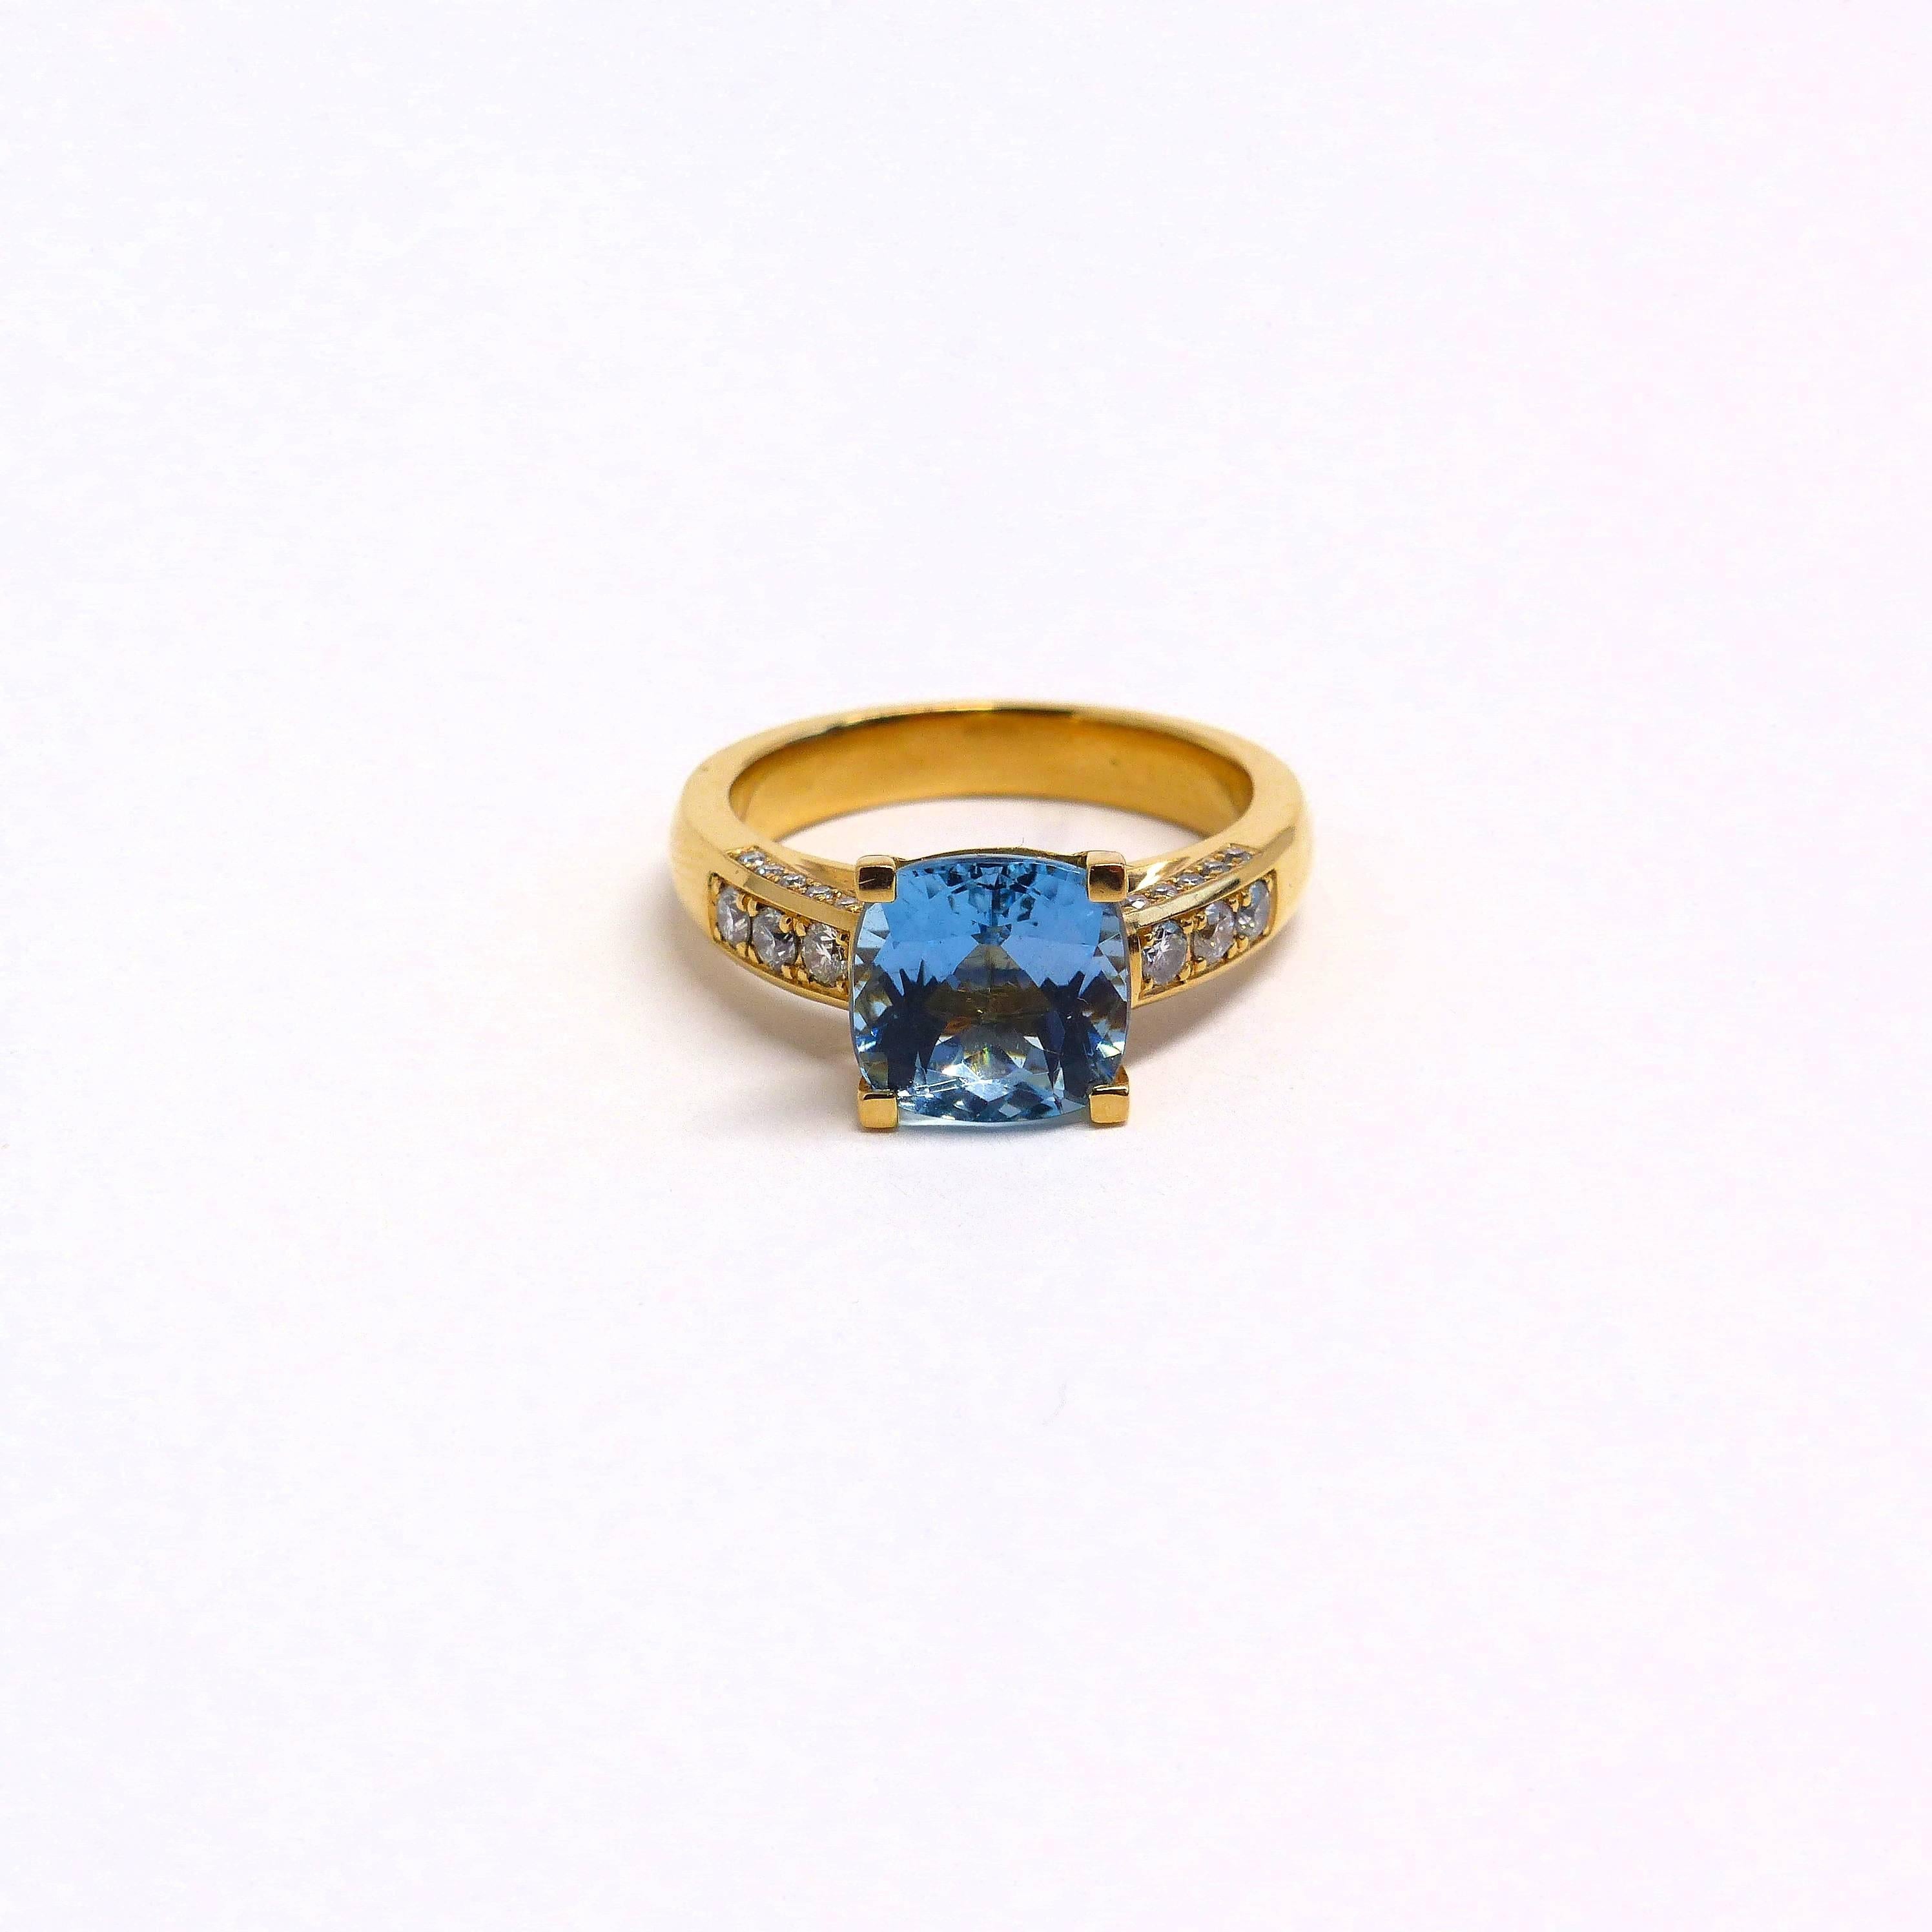 Thomas Leyser is renowned for his contemporary jewellery designs utilizing fine coloured gemstones and diamonds. 

This ring in 18k rose gold (7.15g) is set with 1x fine Aquamarine (facetted, cushion, 8.5x8.5mm, 2.55ct) & 26x Diamonds